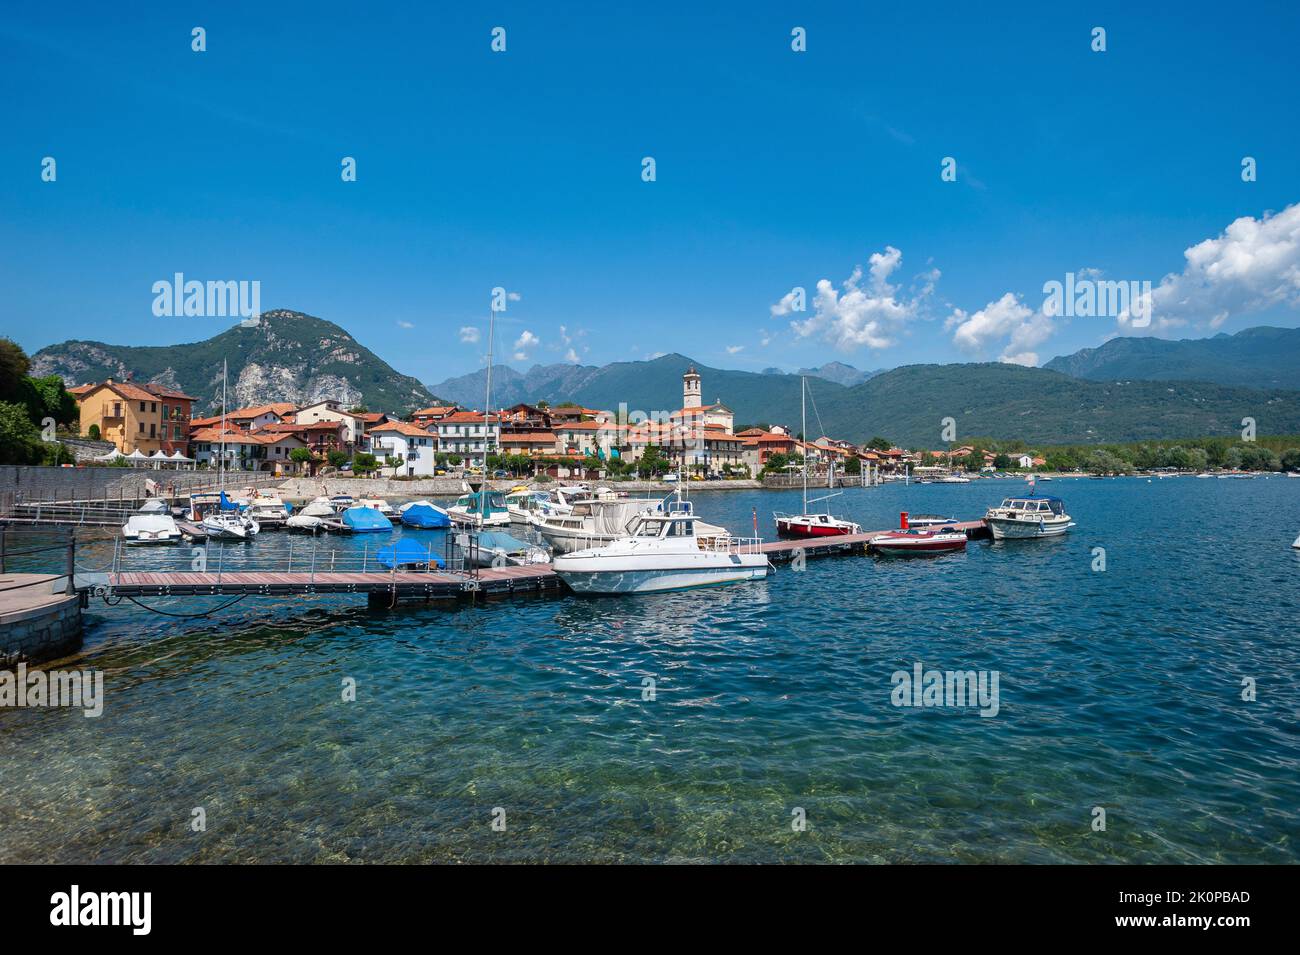 Small harbor with town view, Feriolo, Piedmont, Italy, Europe Stock Photo